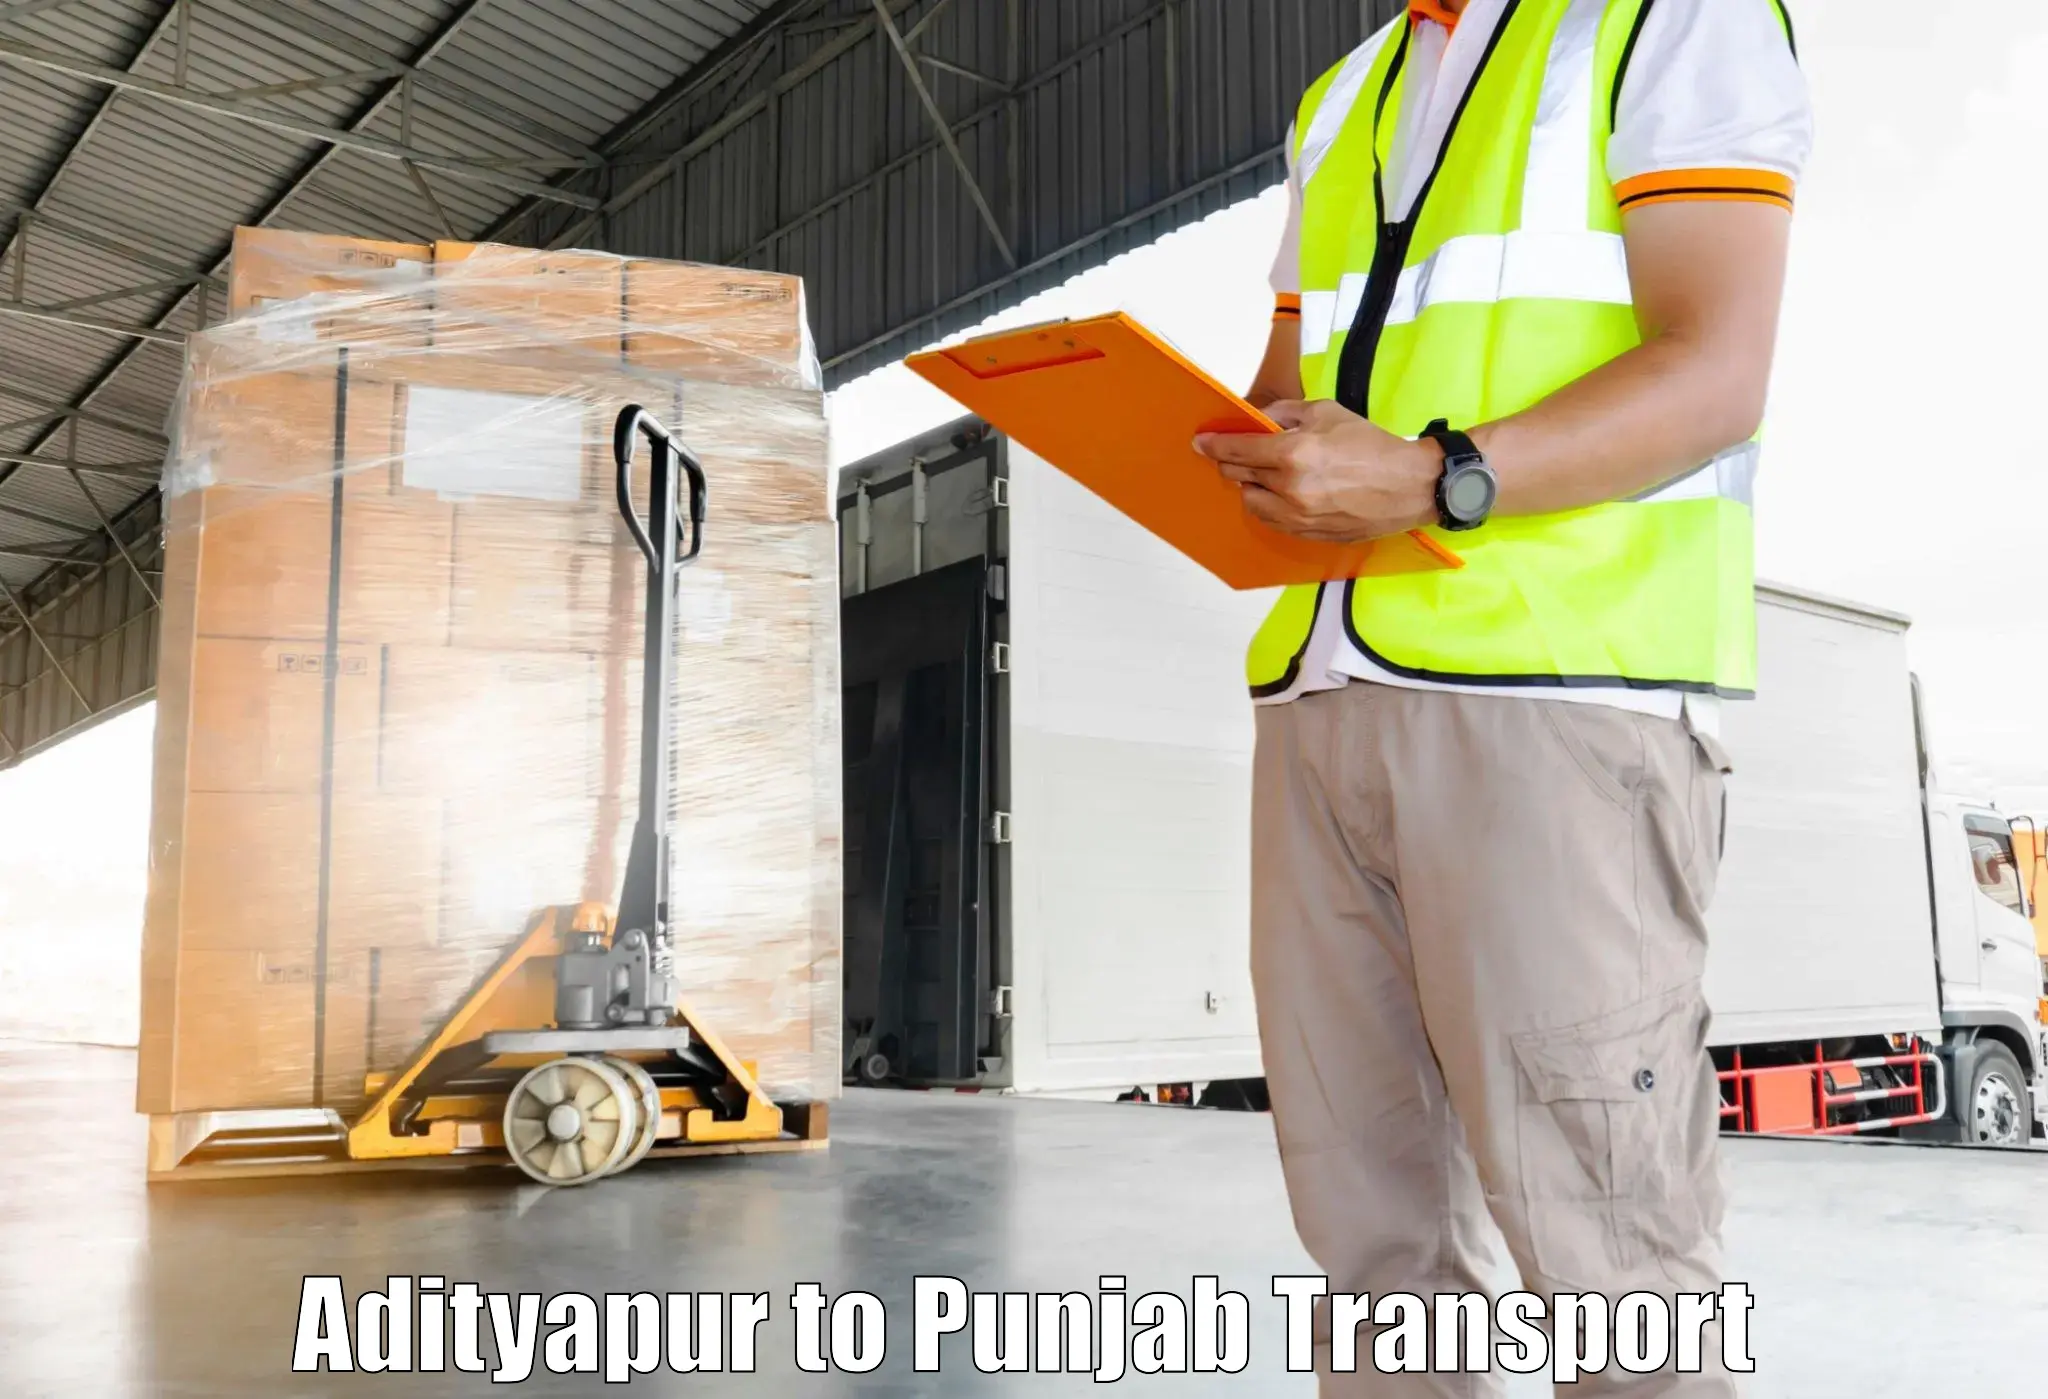 Container transport service Adityapur to Amritsar